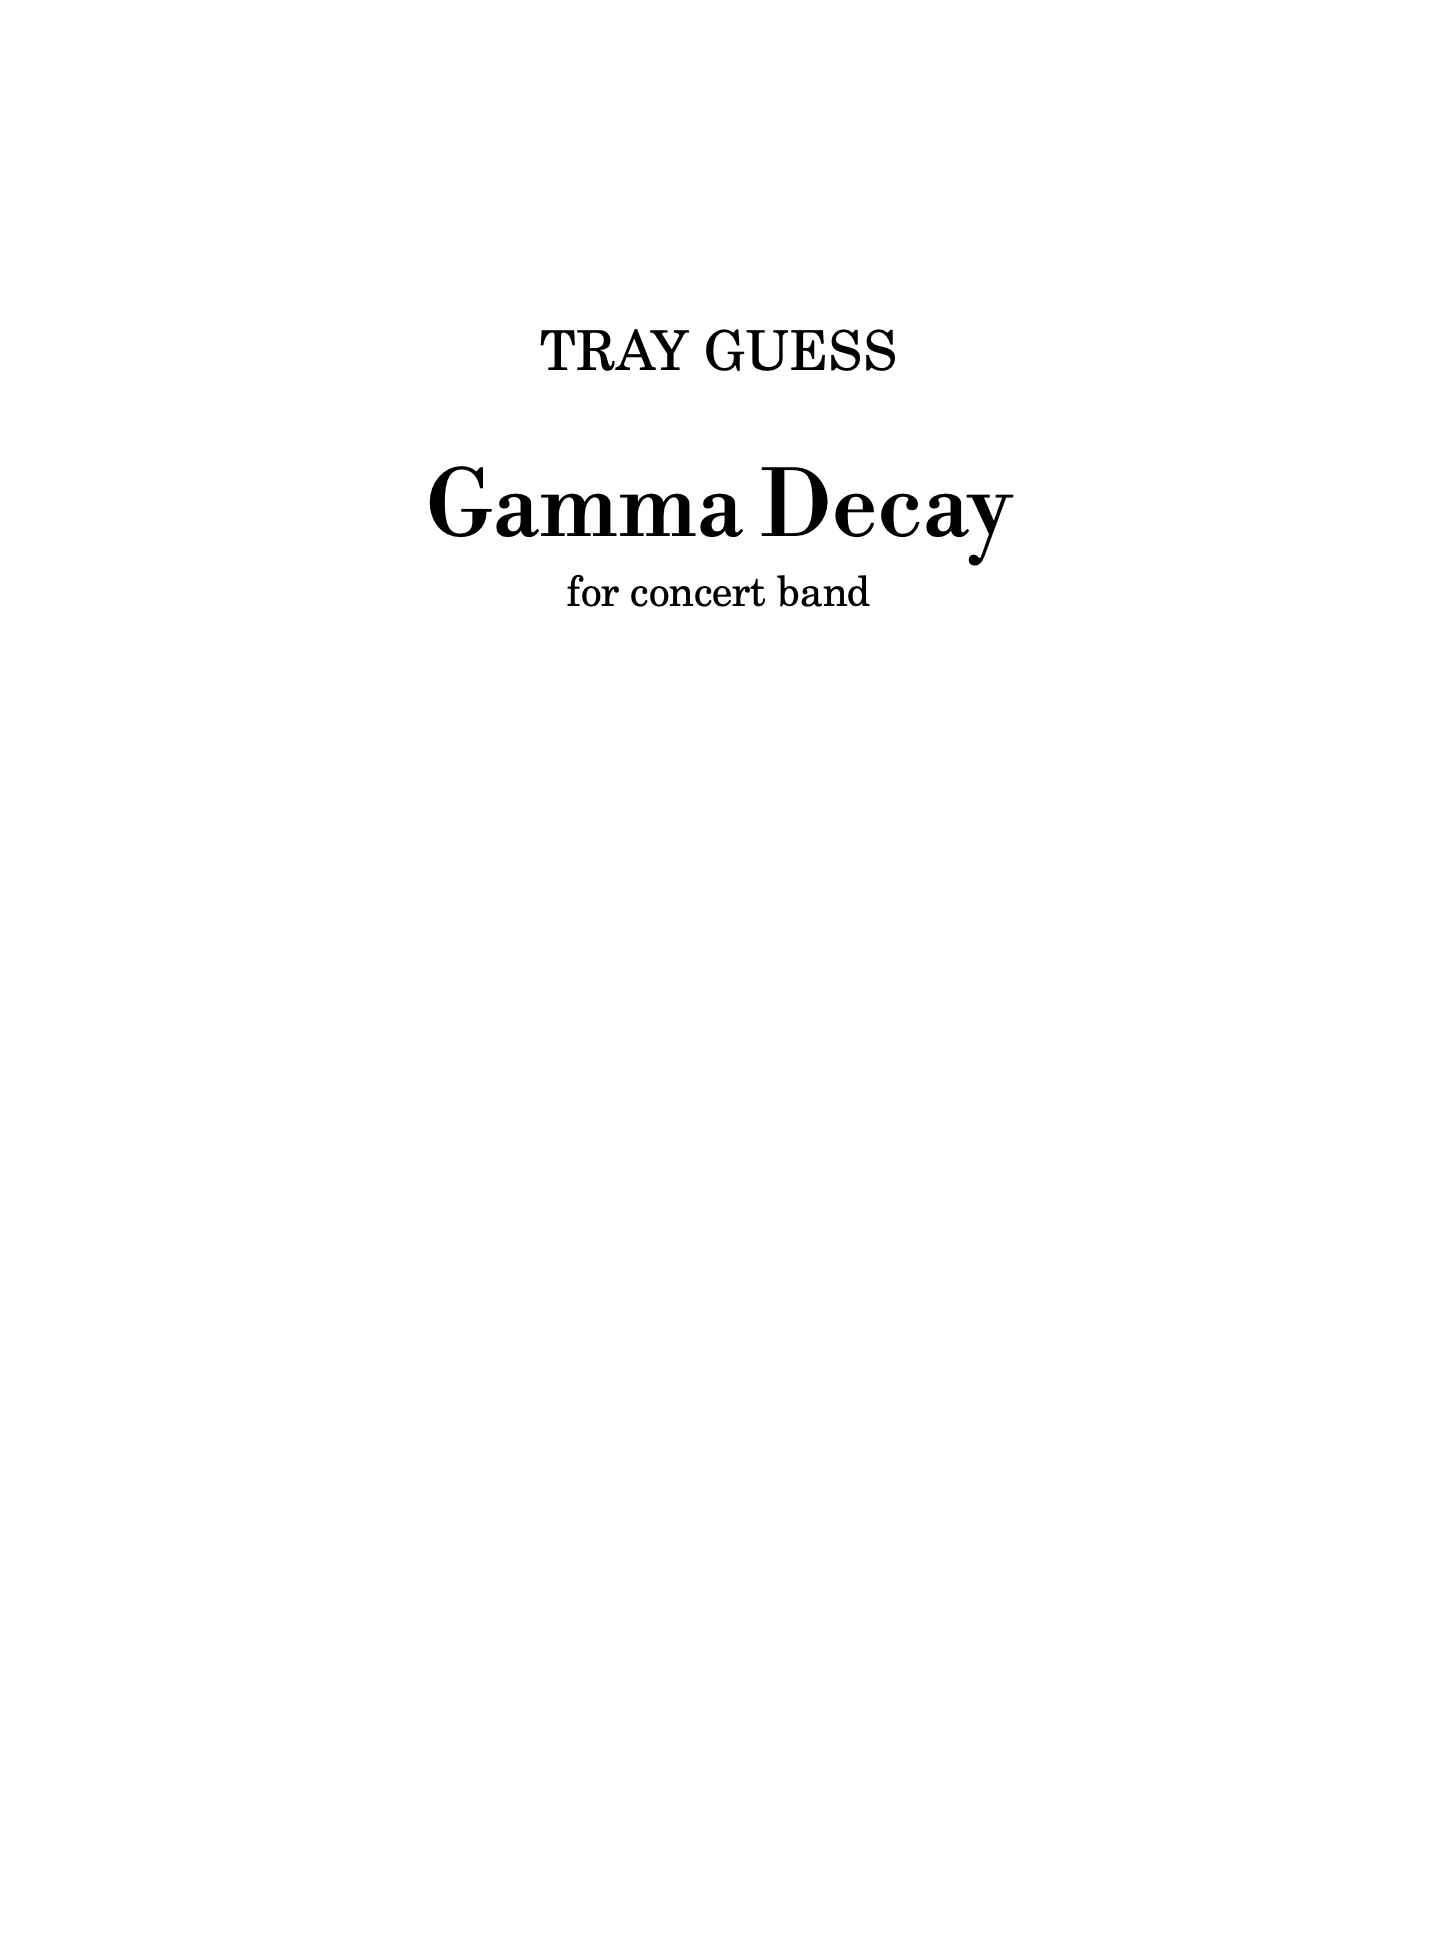 Gamma Decay (Score Only) by Tray Guess